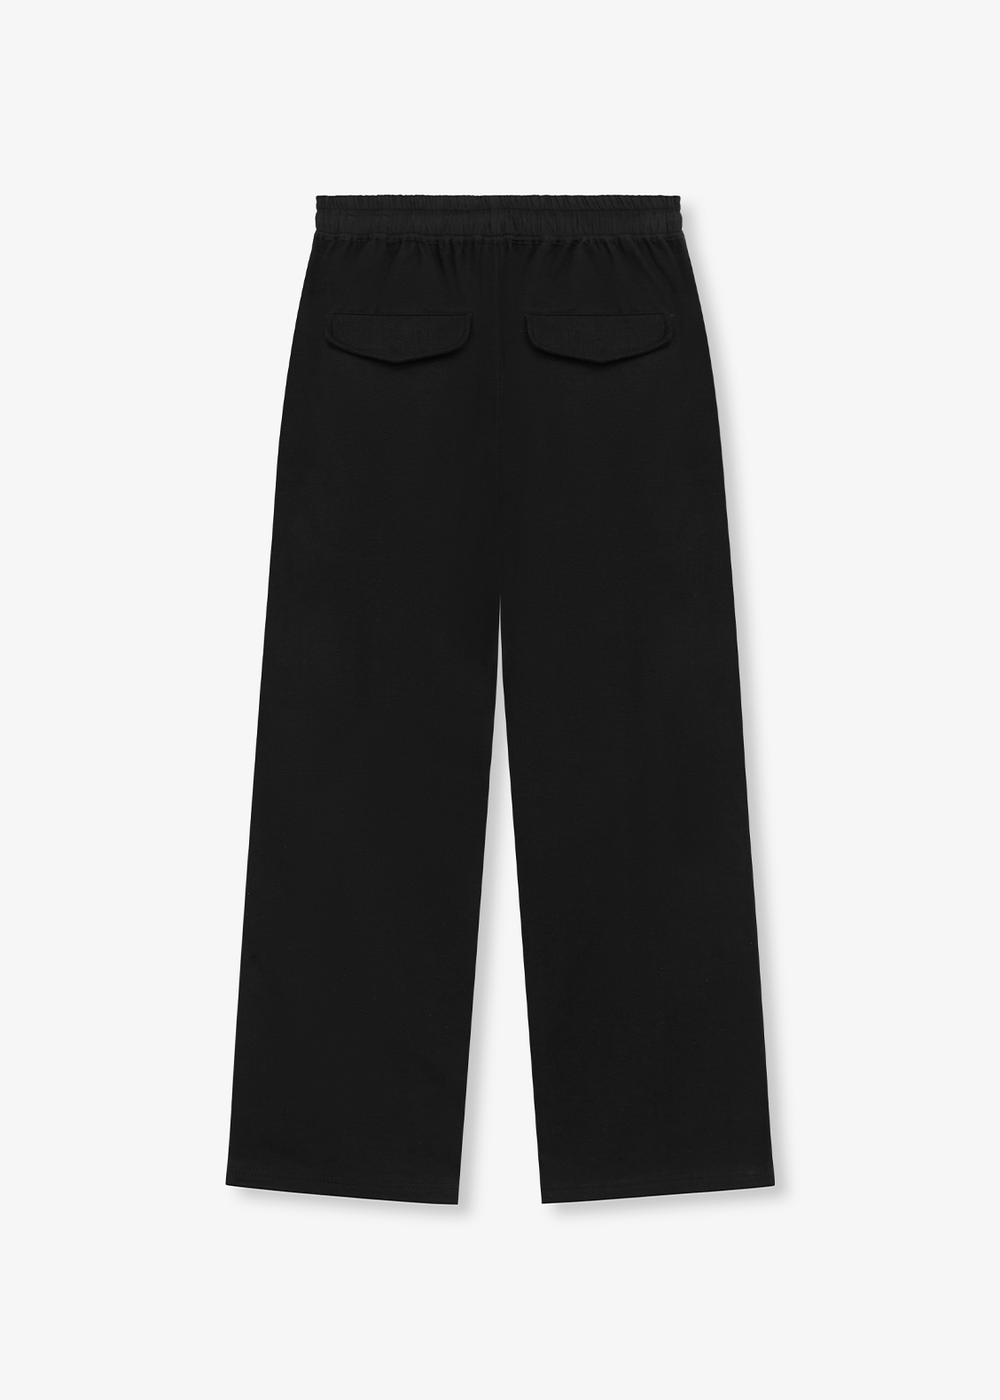 Solace Theory - Cotton Canvas Pant / Black | SOLACE THEORY | Mad About The Boy